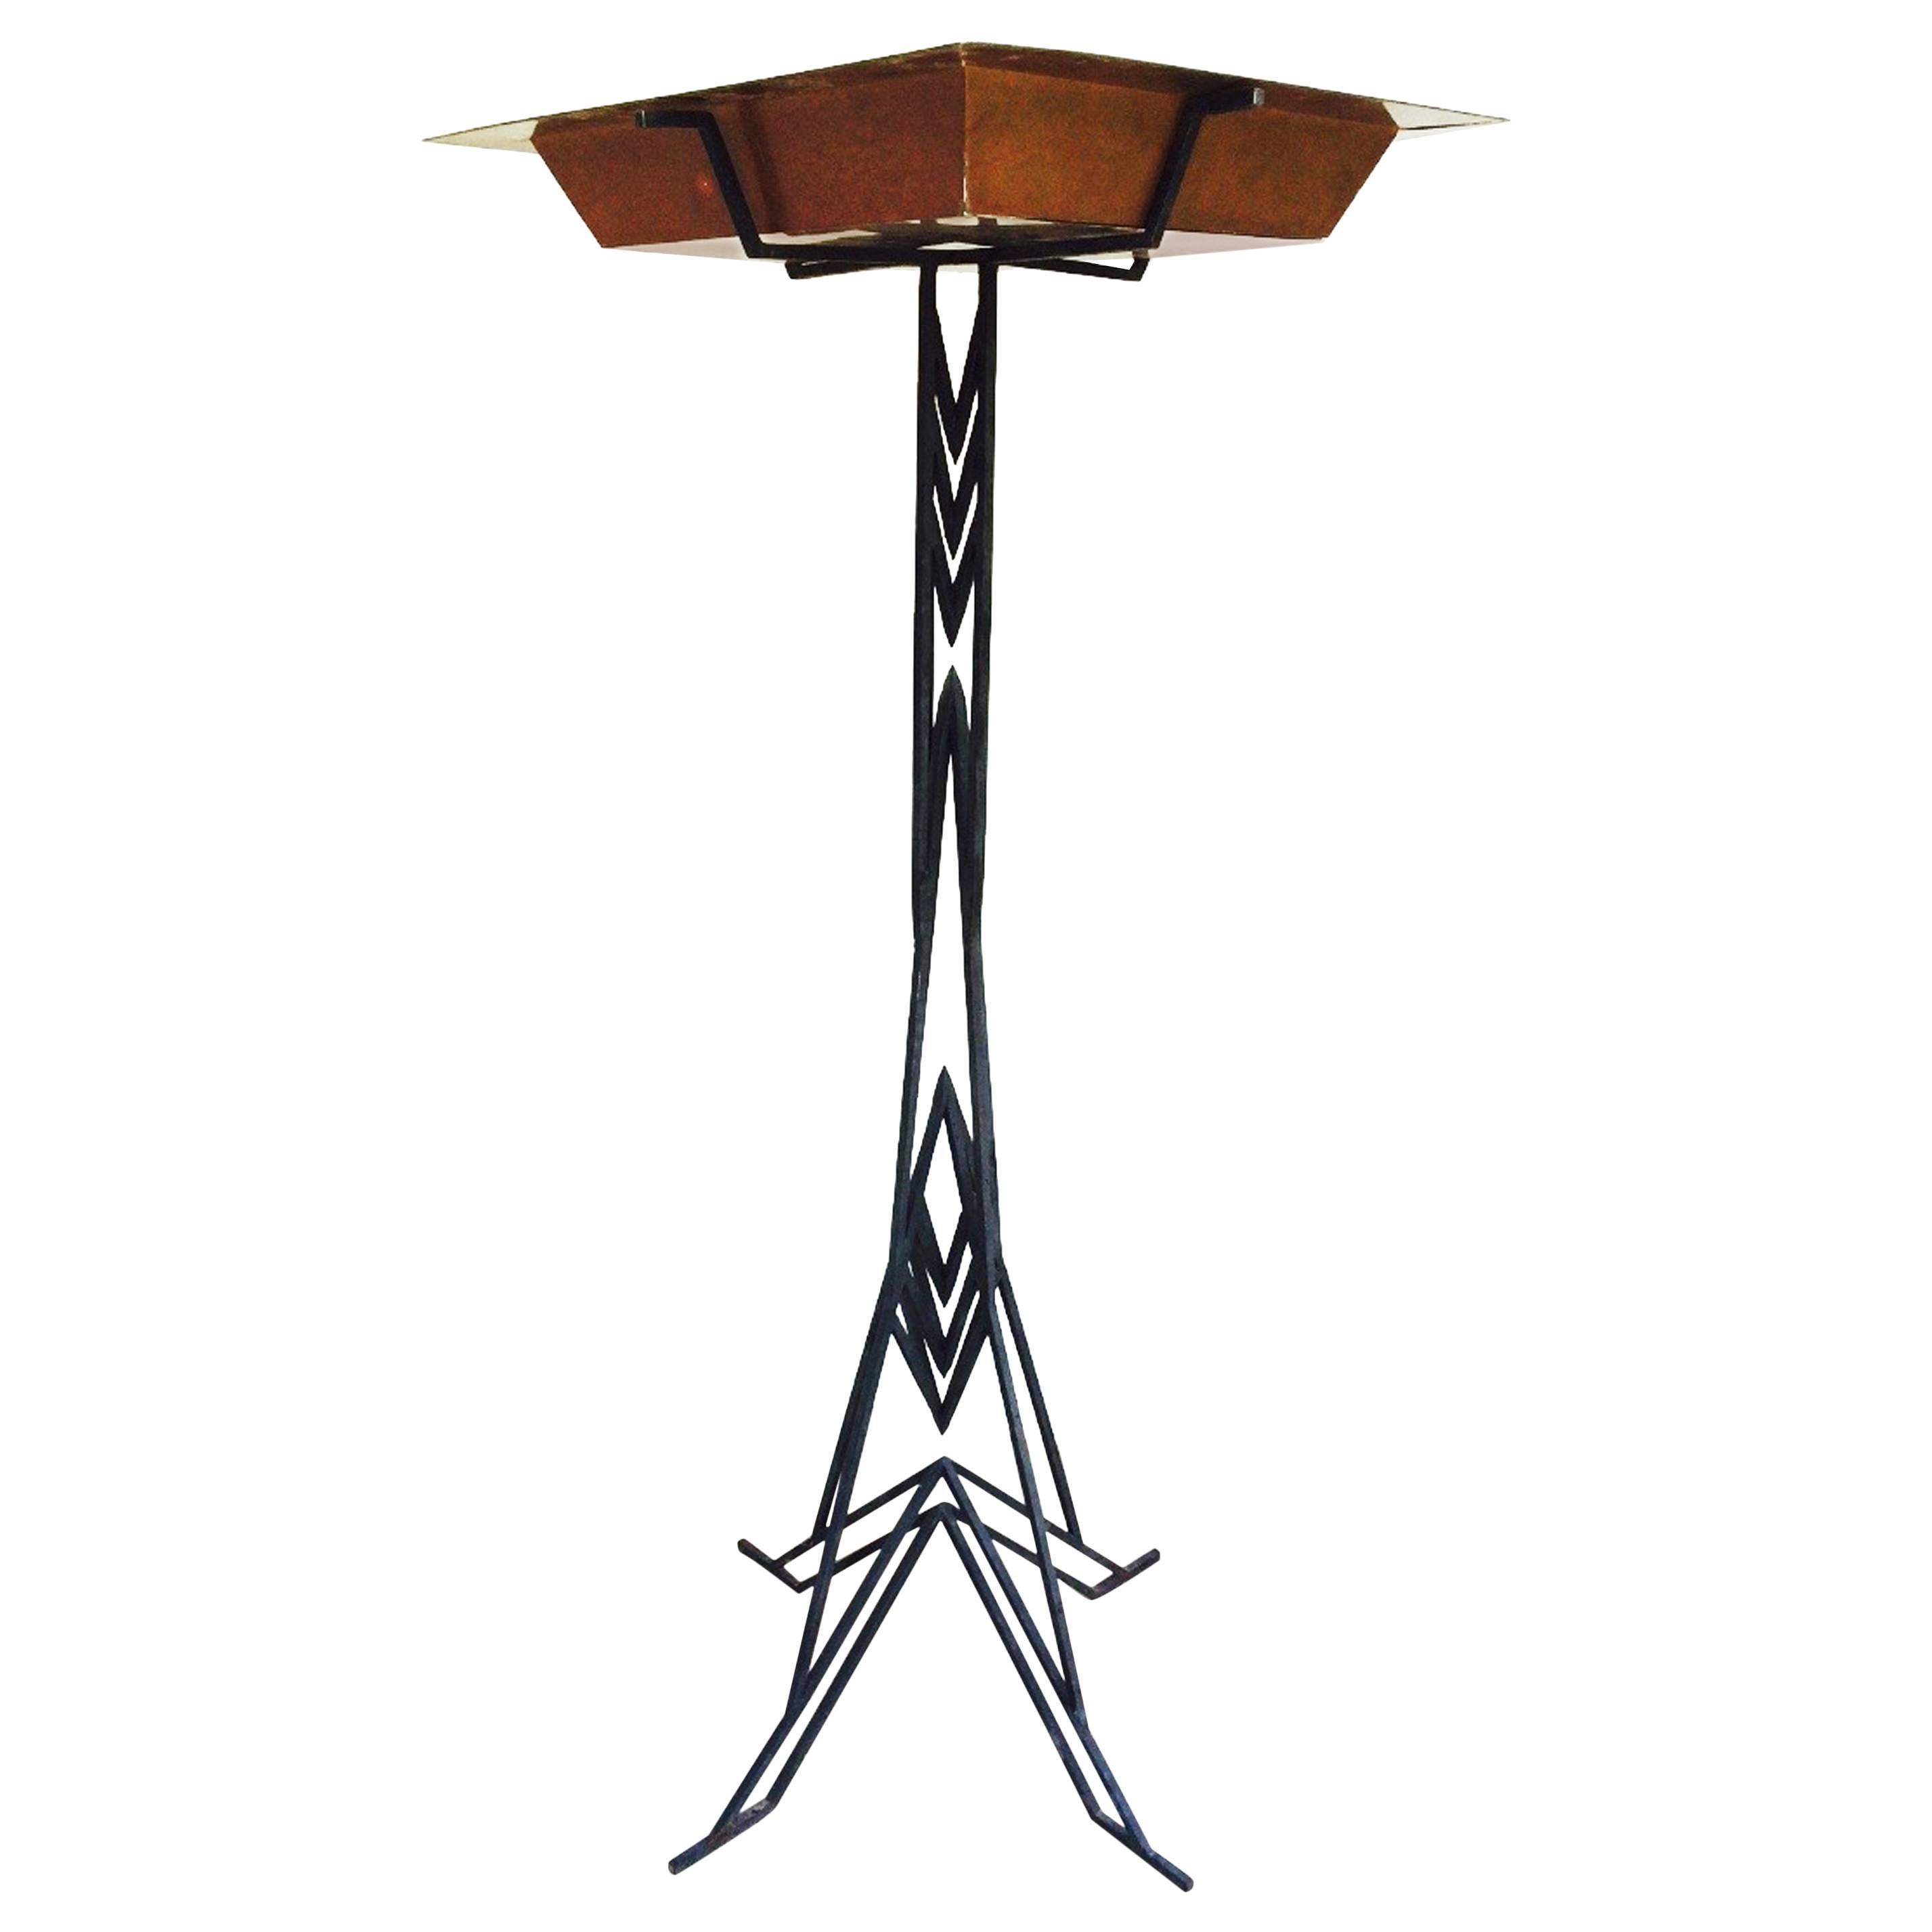 Monumental Warren McArthur Frank Lloyd Wright Wrought Iron Plant Stand, 1929 For Sale